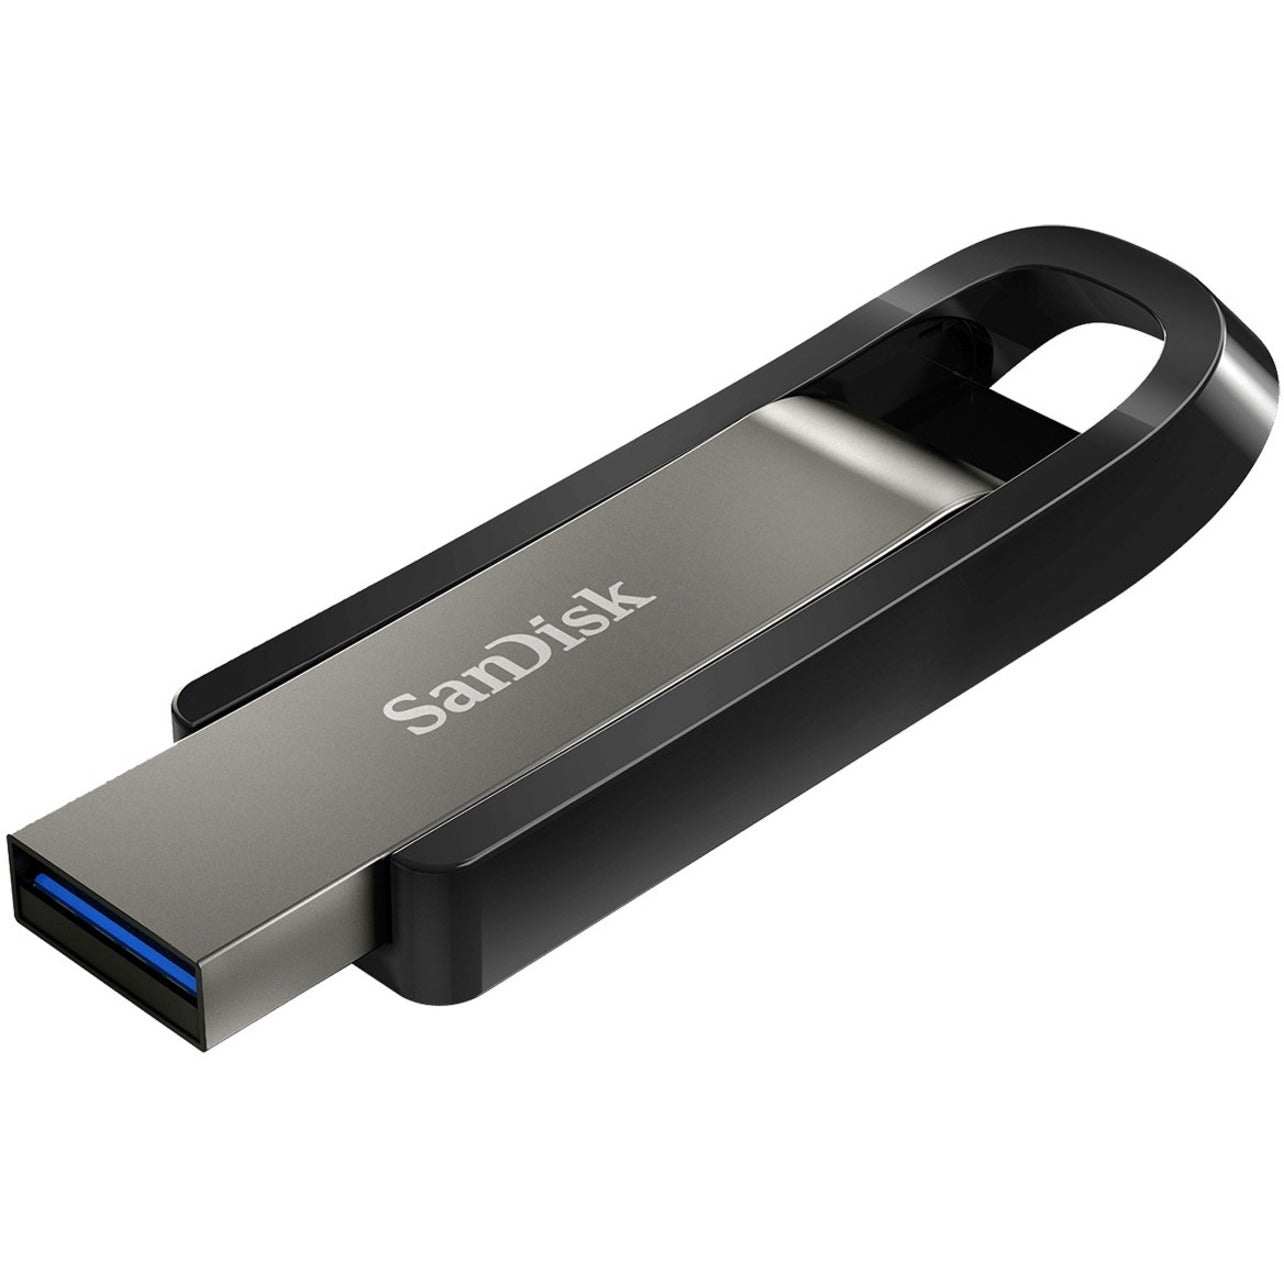 SanDisk SDCZ810-064G-A46 Extreme Go USB 3.2 Flash Drive - 64GB, Fast Transfer Speeds, Durable Design